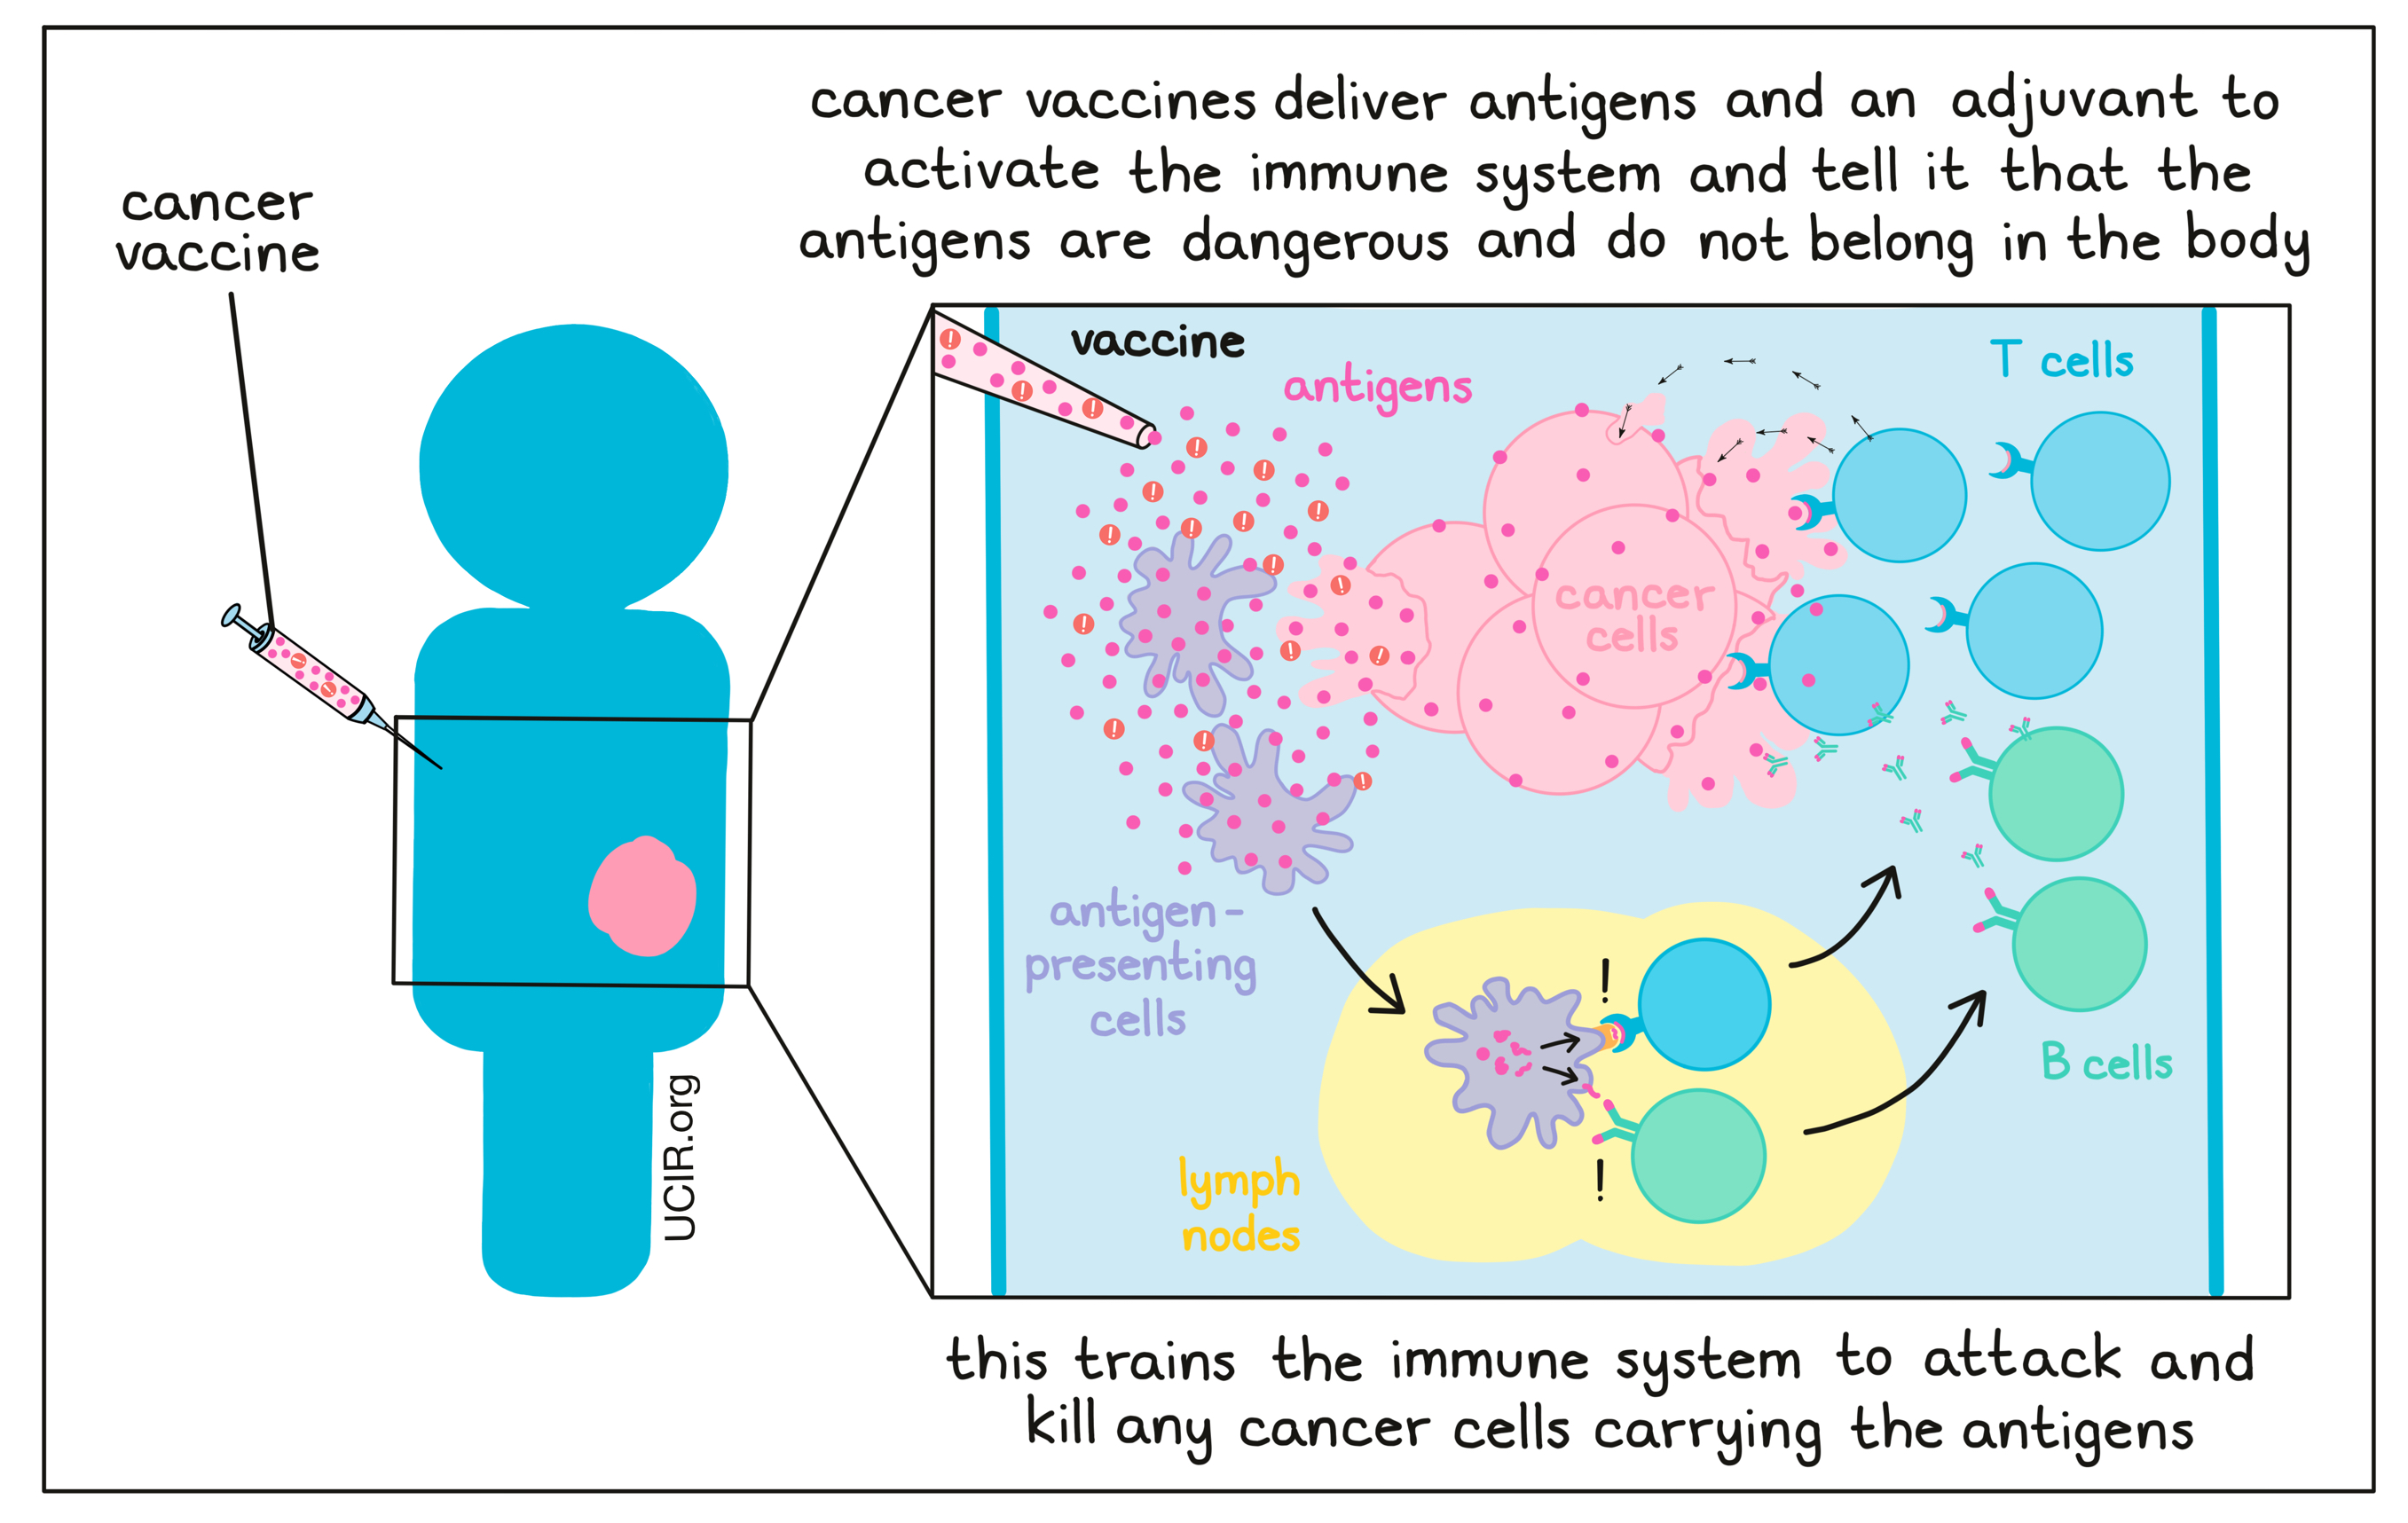 Cancer vaccines deliver antigens and an adjuvant to activate the immune system